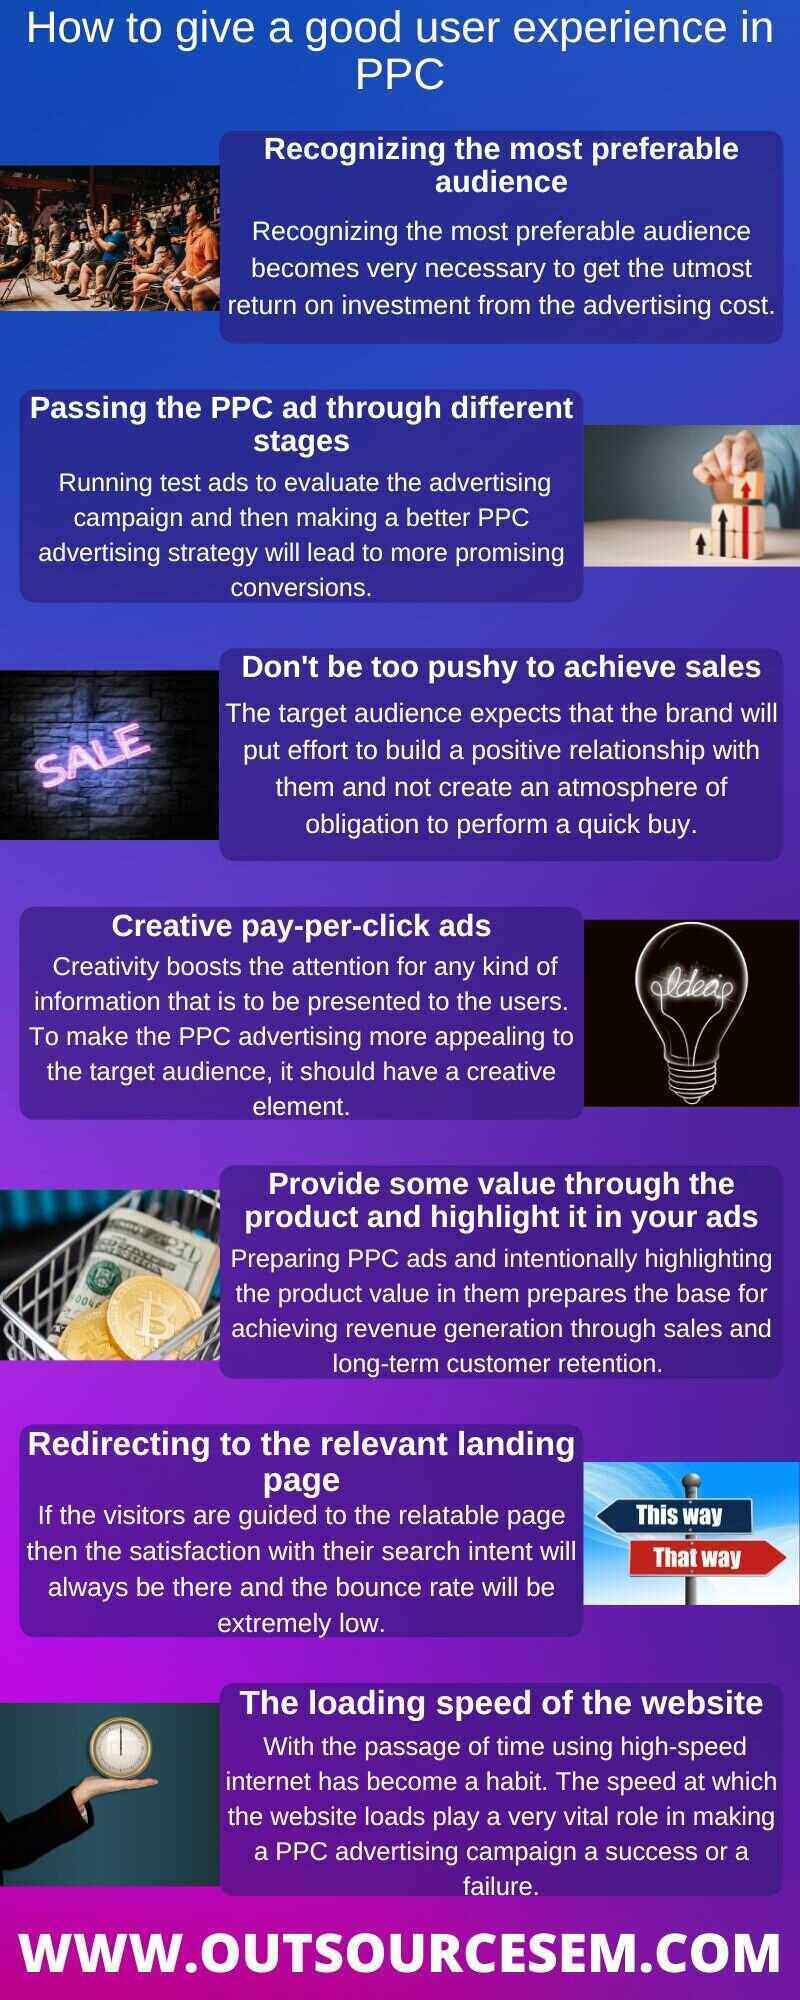 tips-to-enhance-user-experience-in-ppc-advertising-infographic